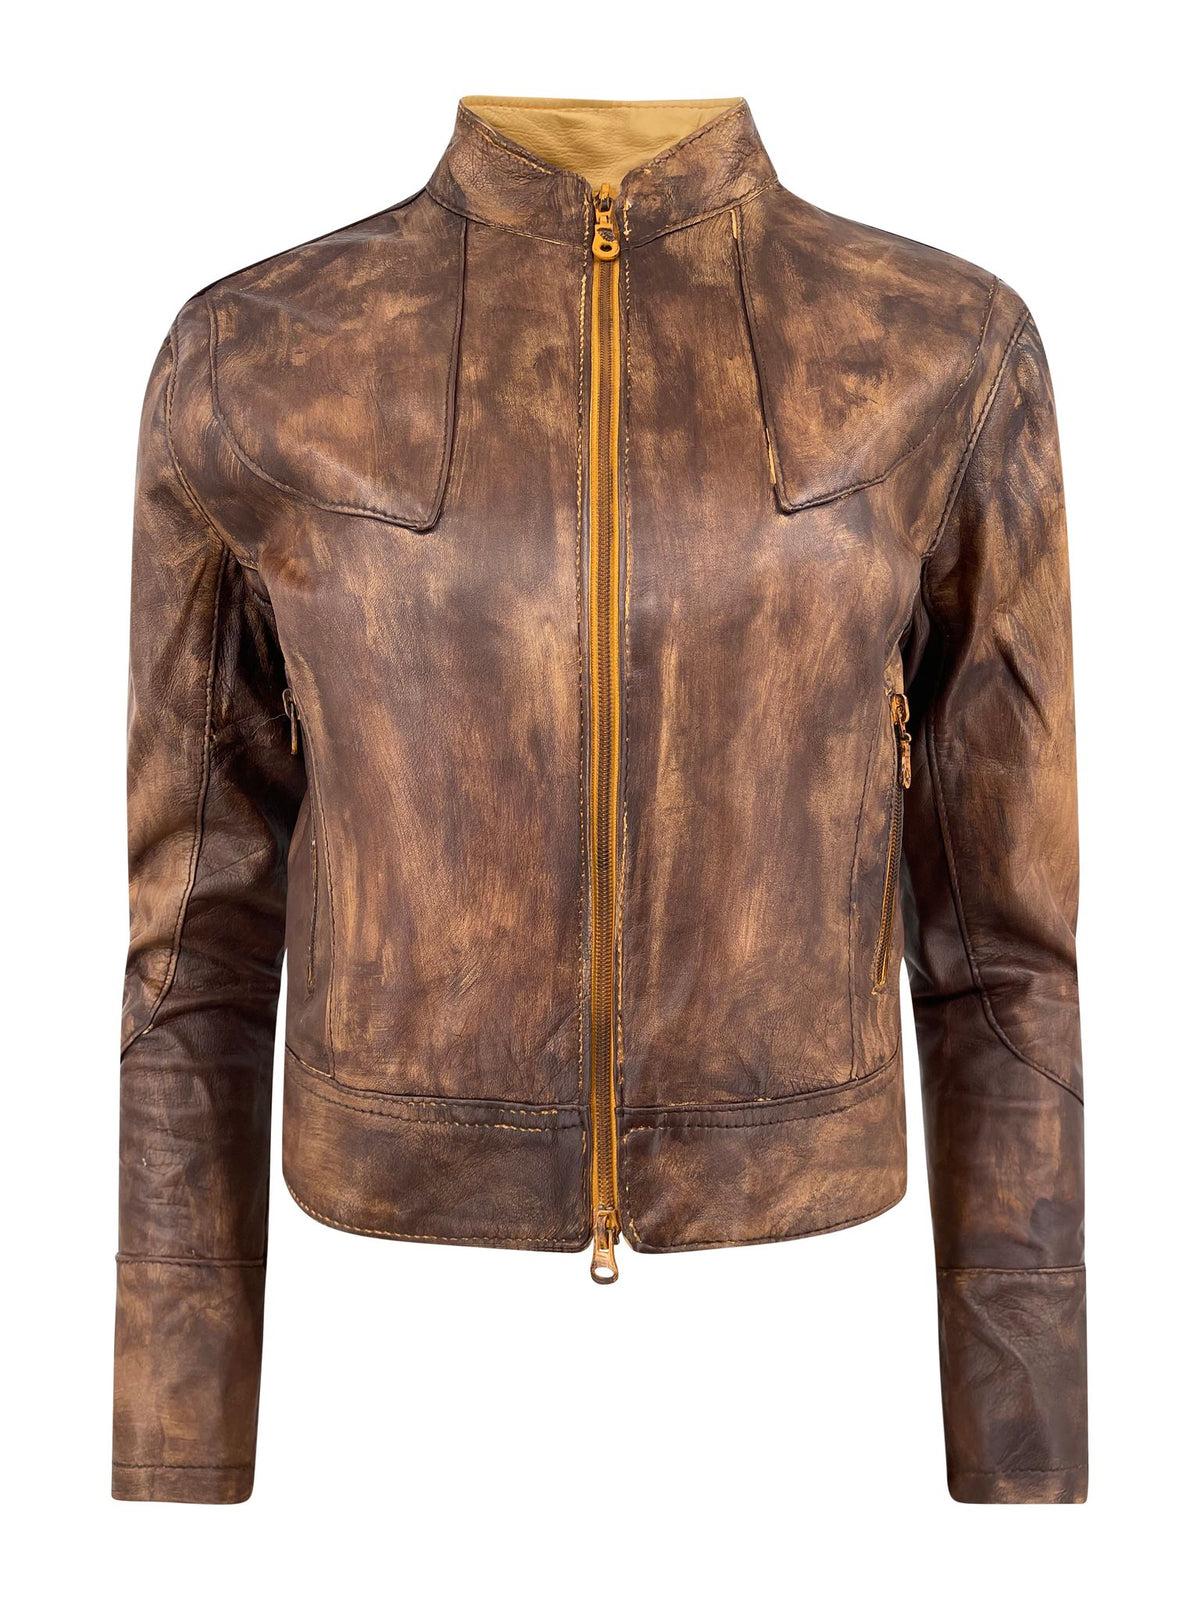 Vintage Faded Brown Leather Jacket - ONFEMME By Lindsey's Kloset